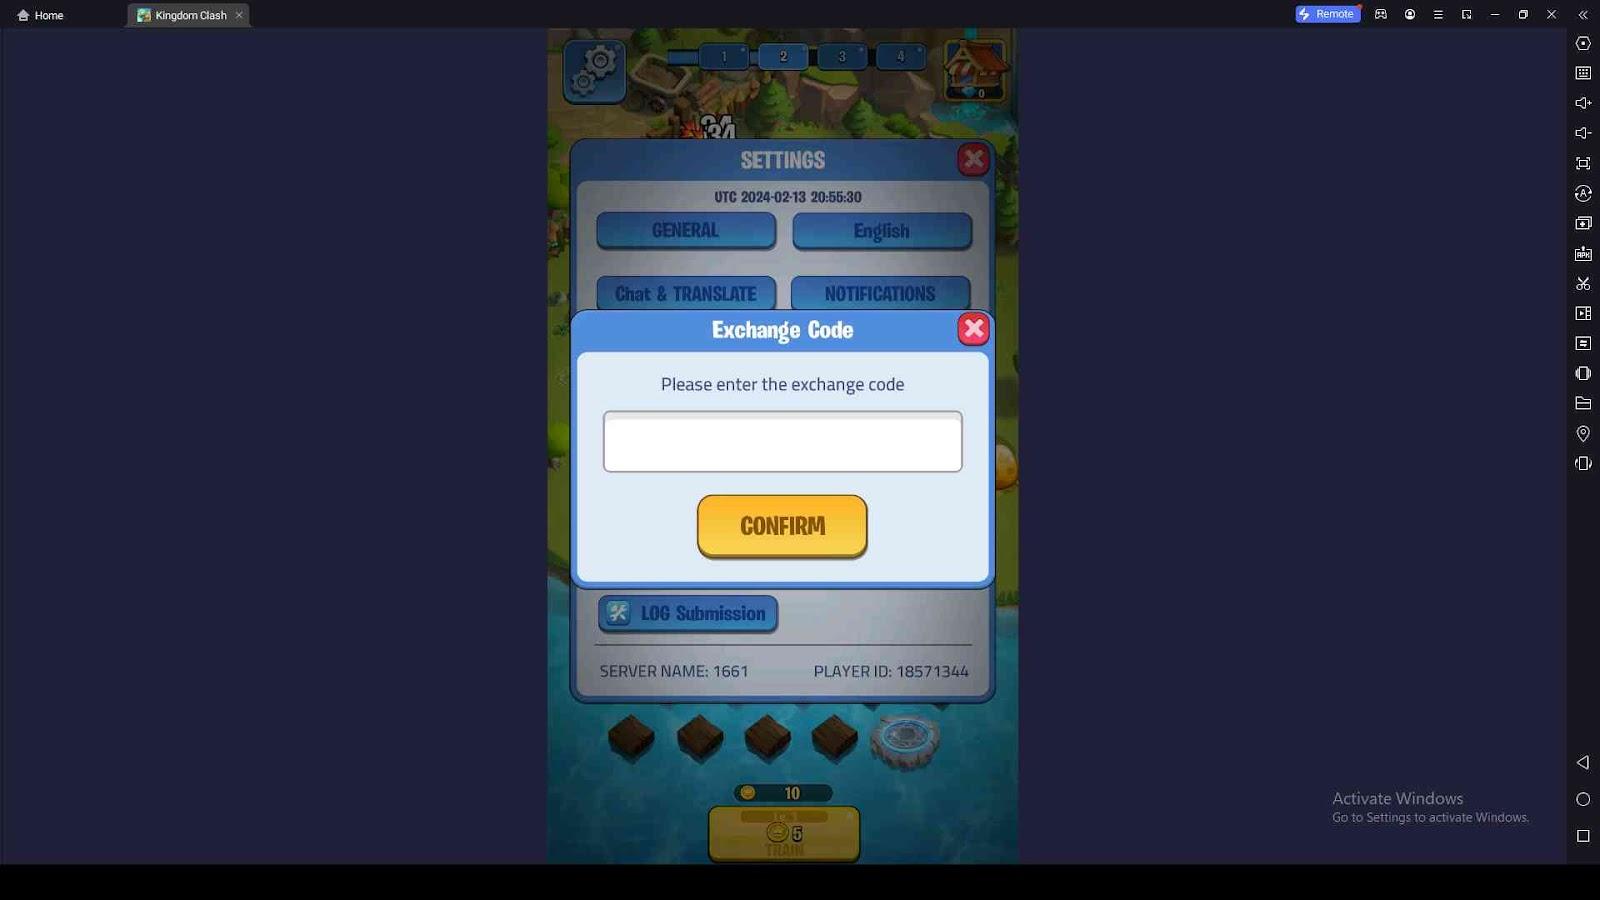 Redeeming Process for the Codes in Kingdom Clash